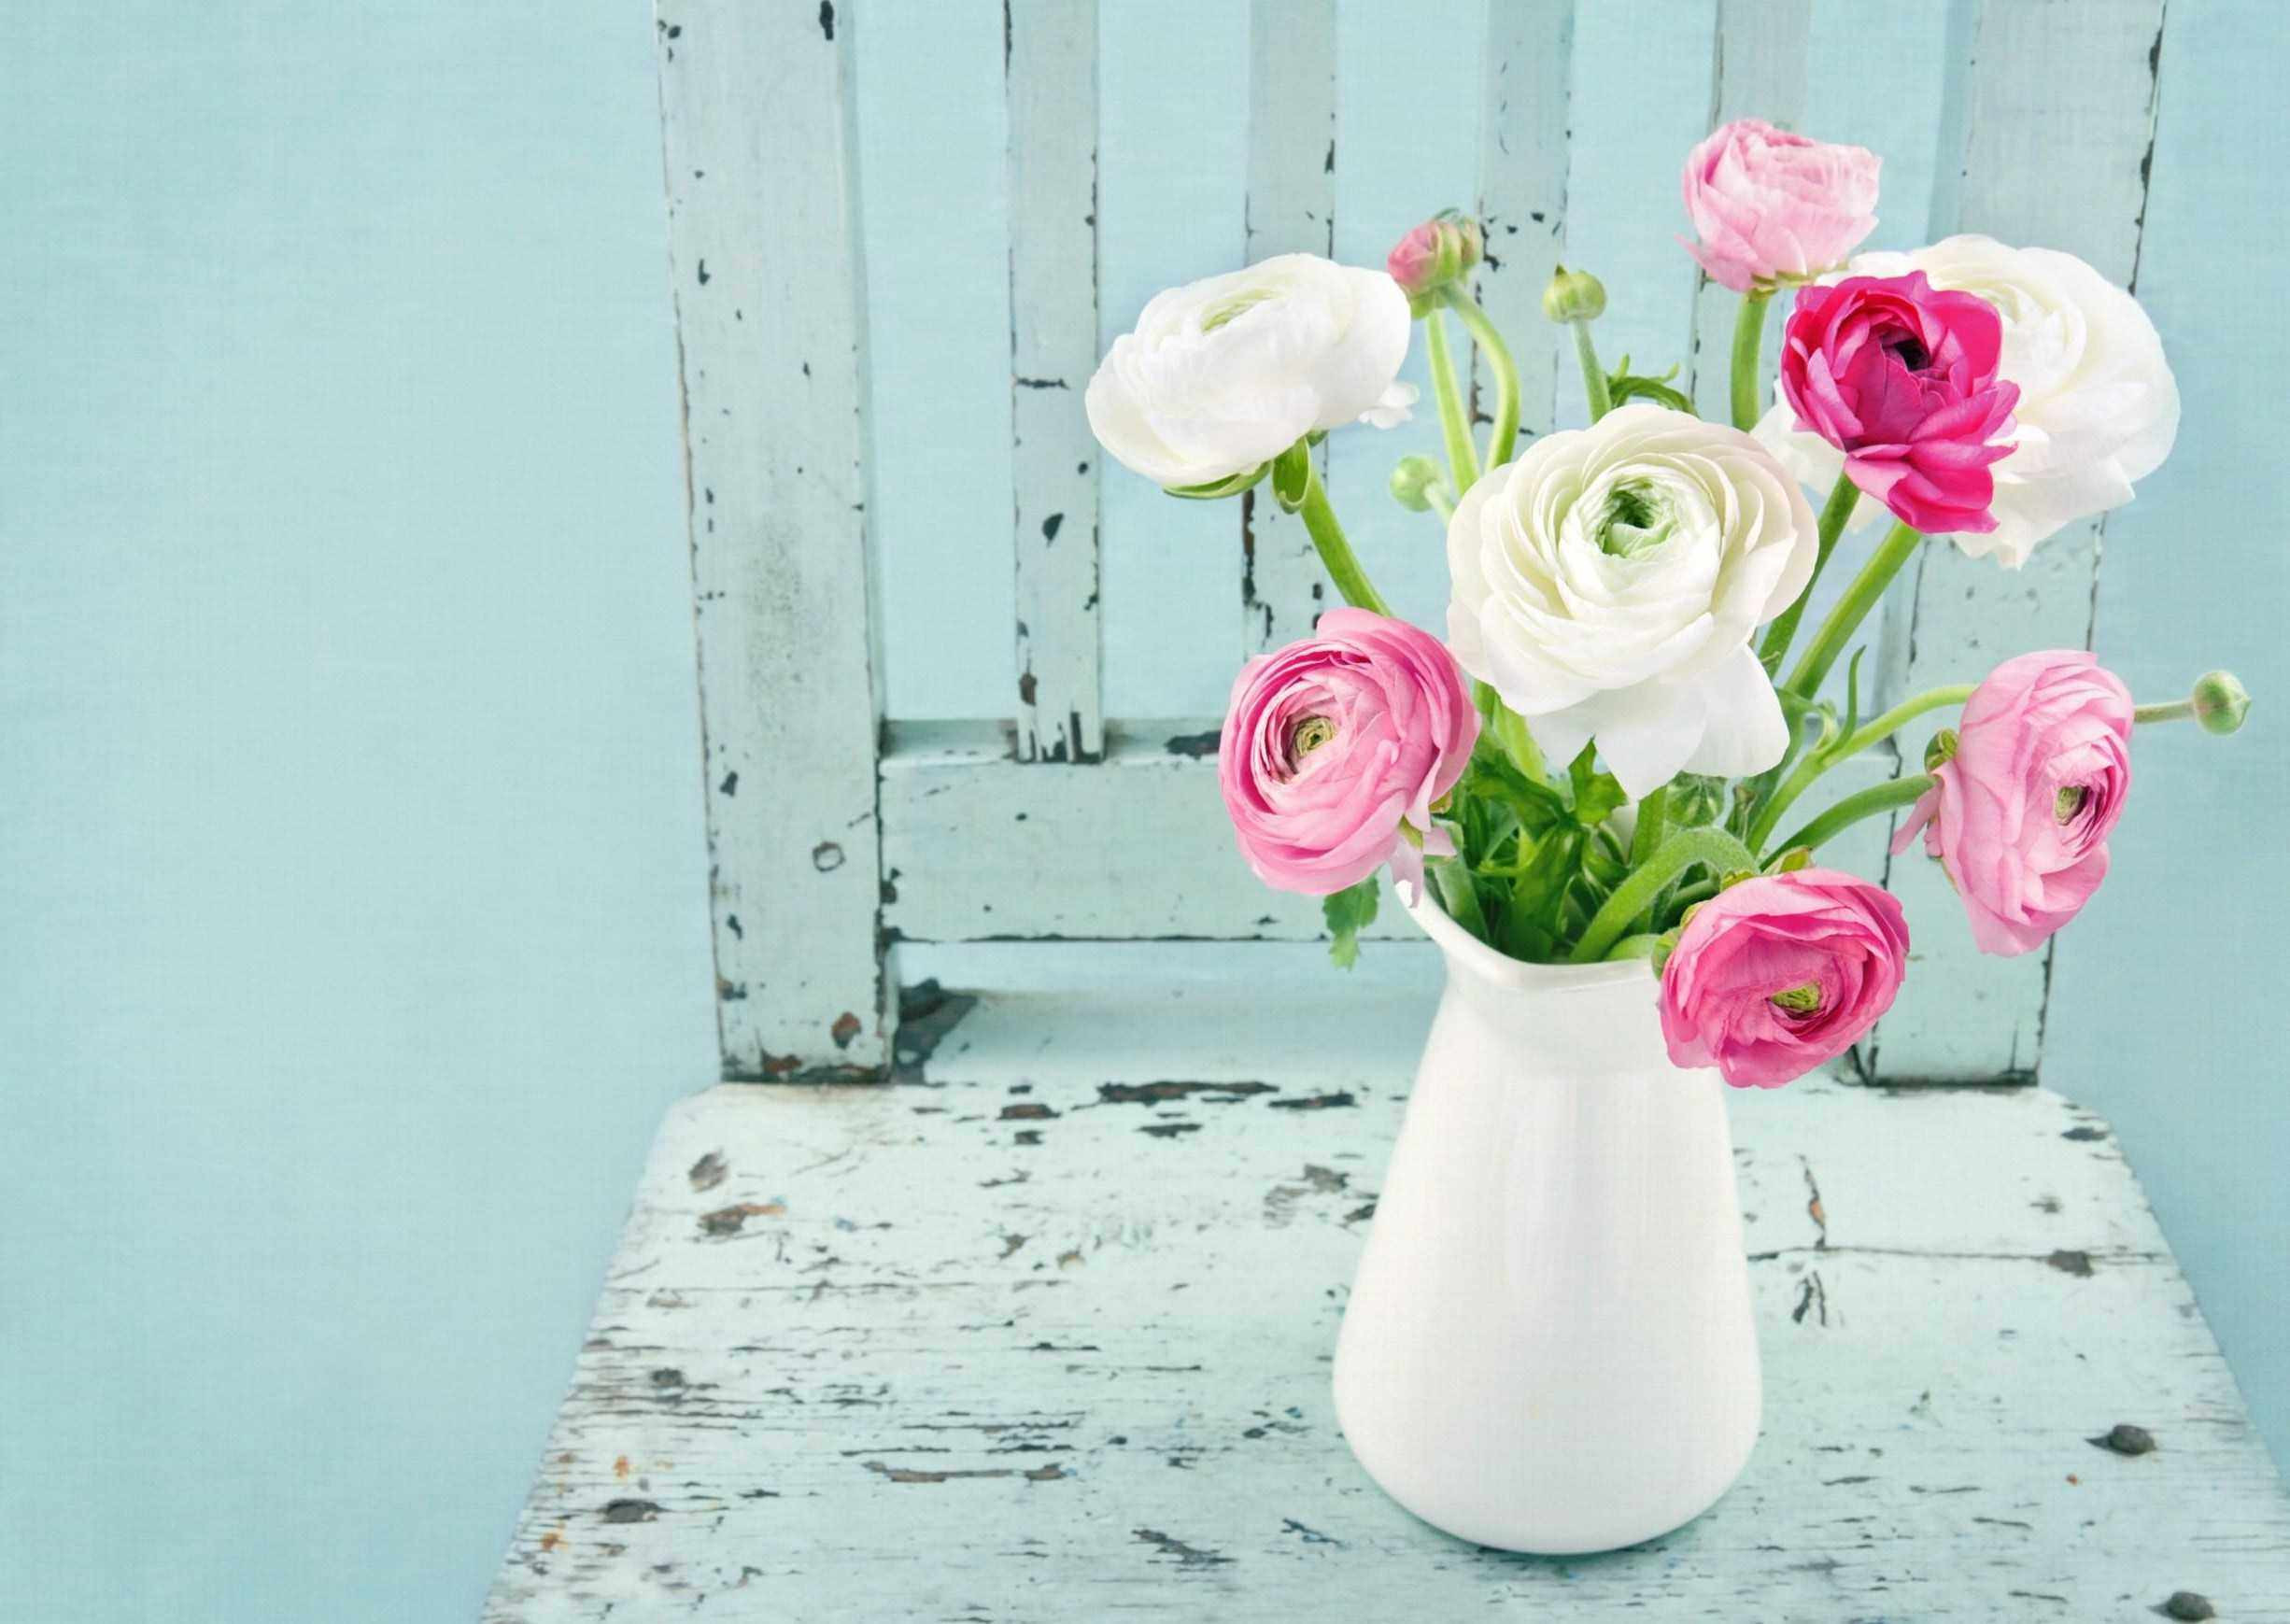 29 Cute Roses with Vase 2024 free download roses with vase of flowers new orleans fresh living room roses in a vase new clear vase pertaining to flowers new orleans fresh living room roses in a vase new clear vase 0d tags amazing ele